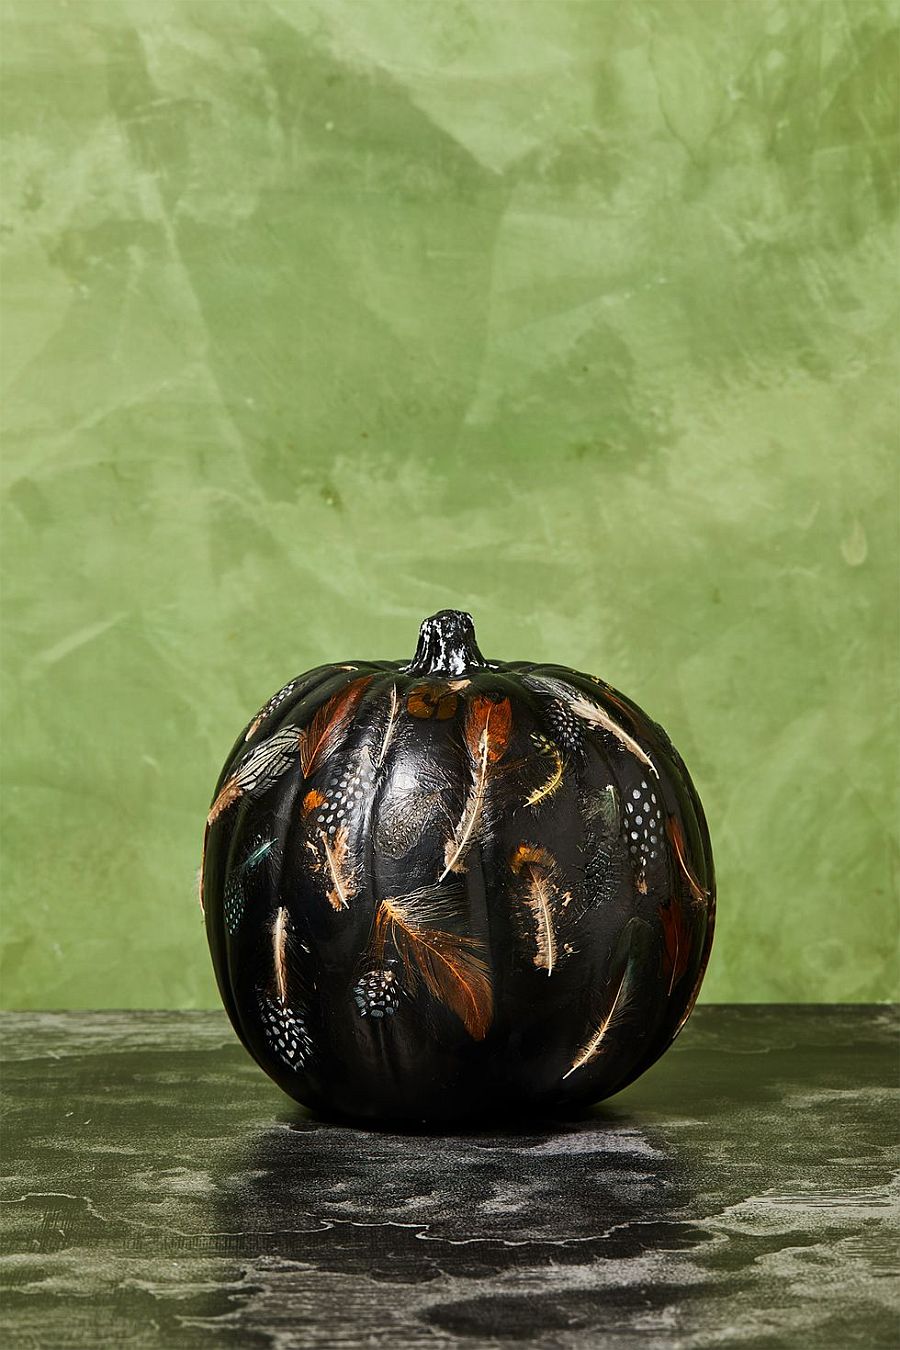 Feathered pattern on the pumpkin turns it into an absolute showstopper